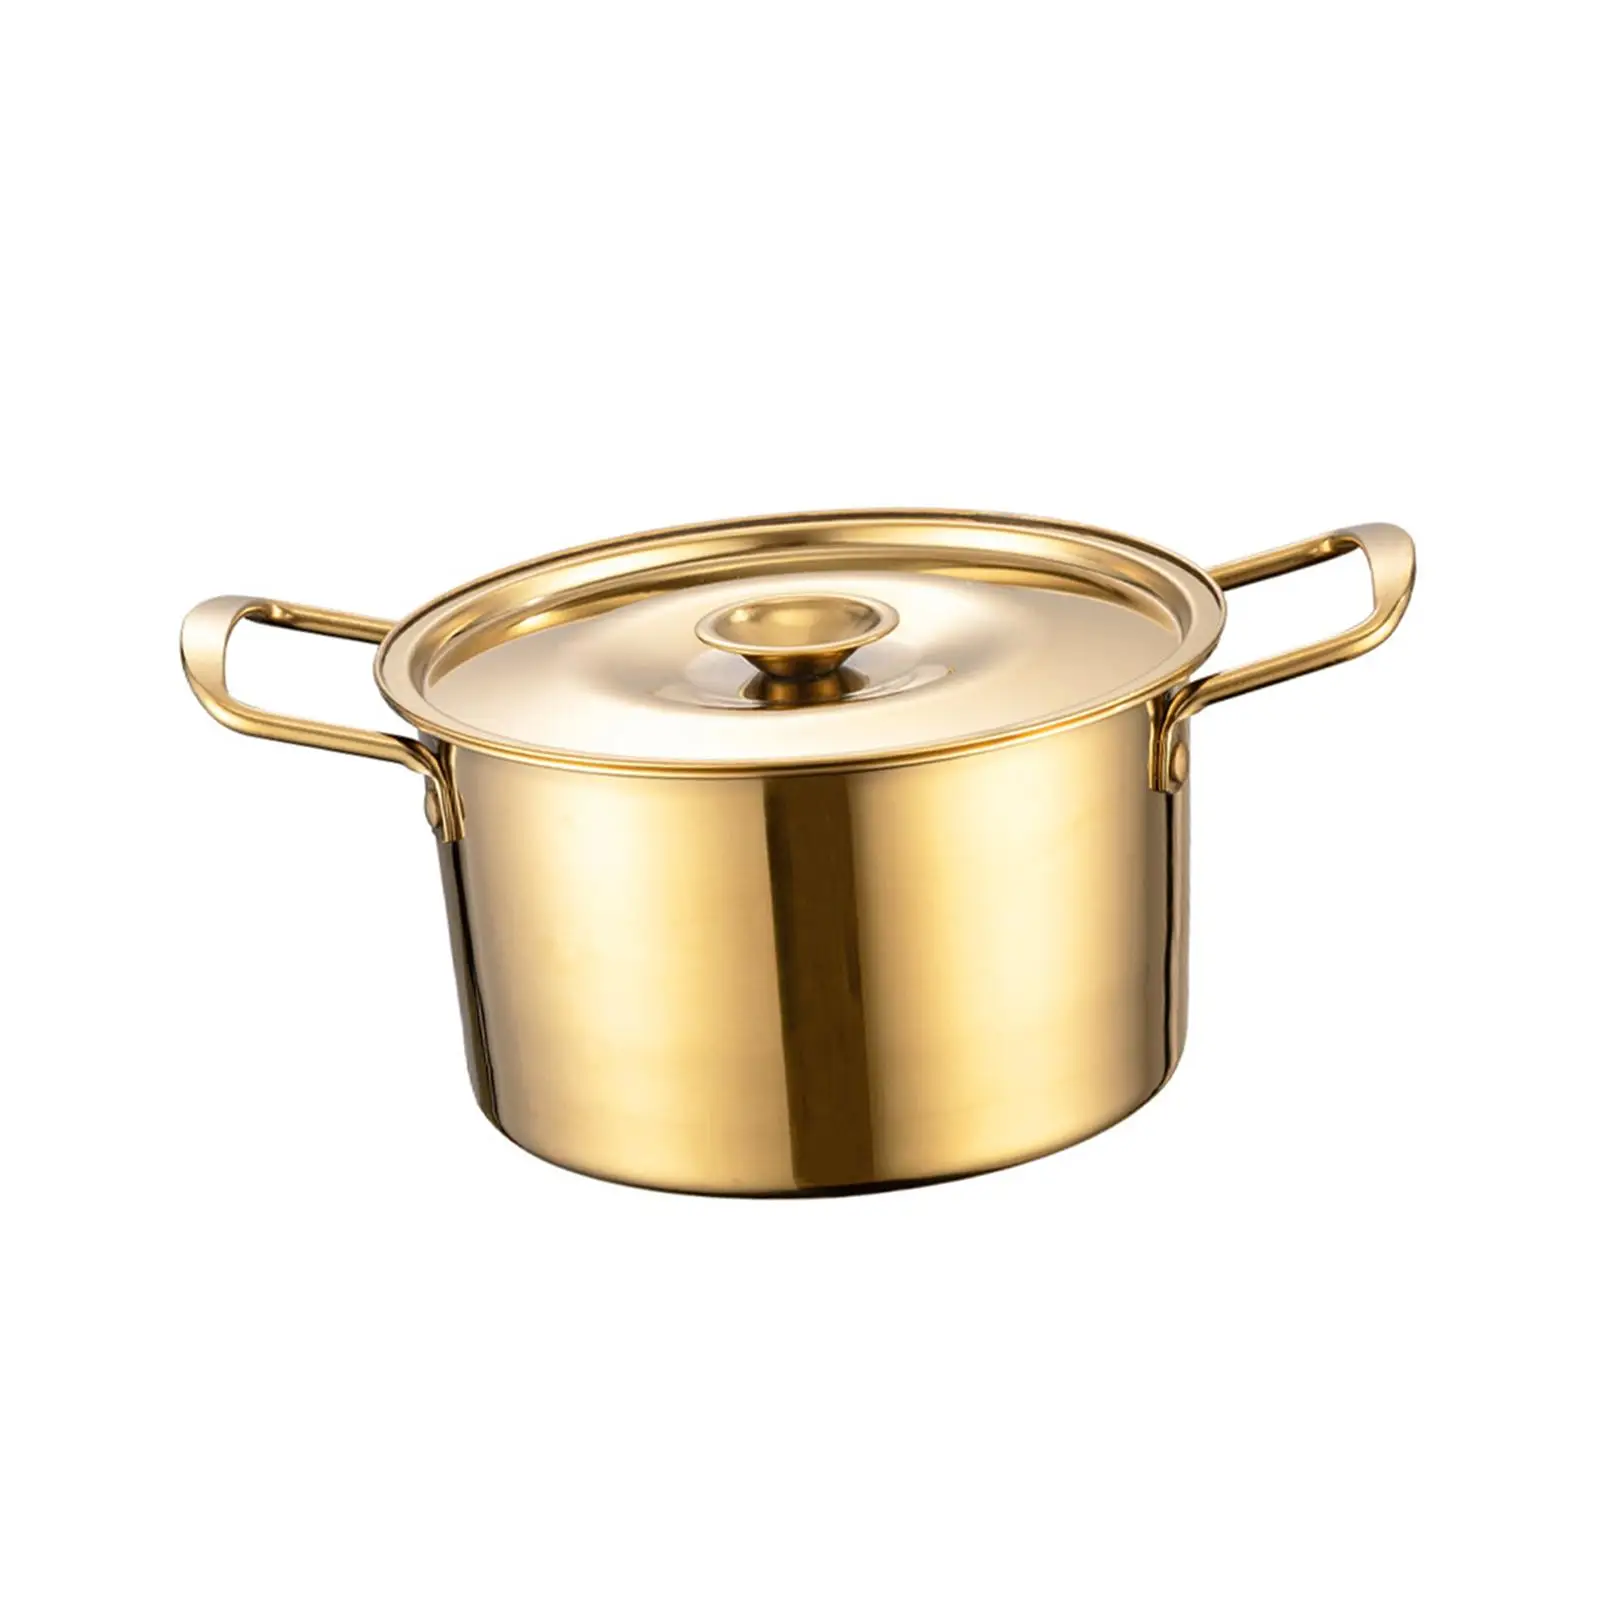 Instant Noodles Pot with Handle Lid Stockpot Stainless Steel Korean Noodle Pot for Stew Soup Pasta Picnic Hiking